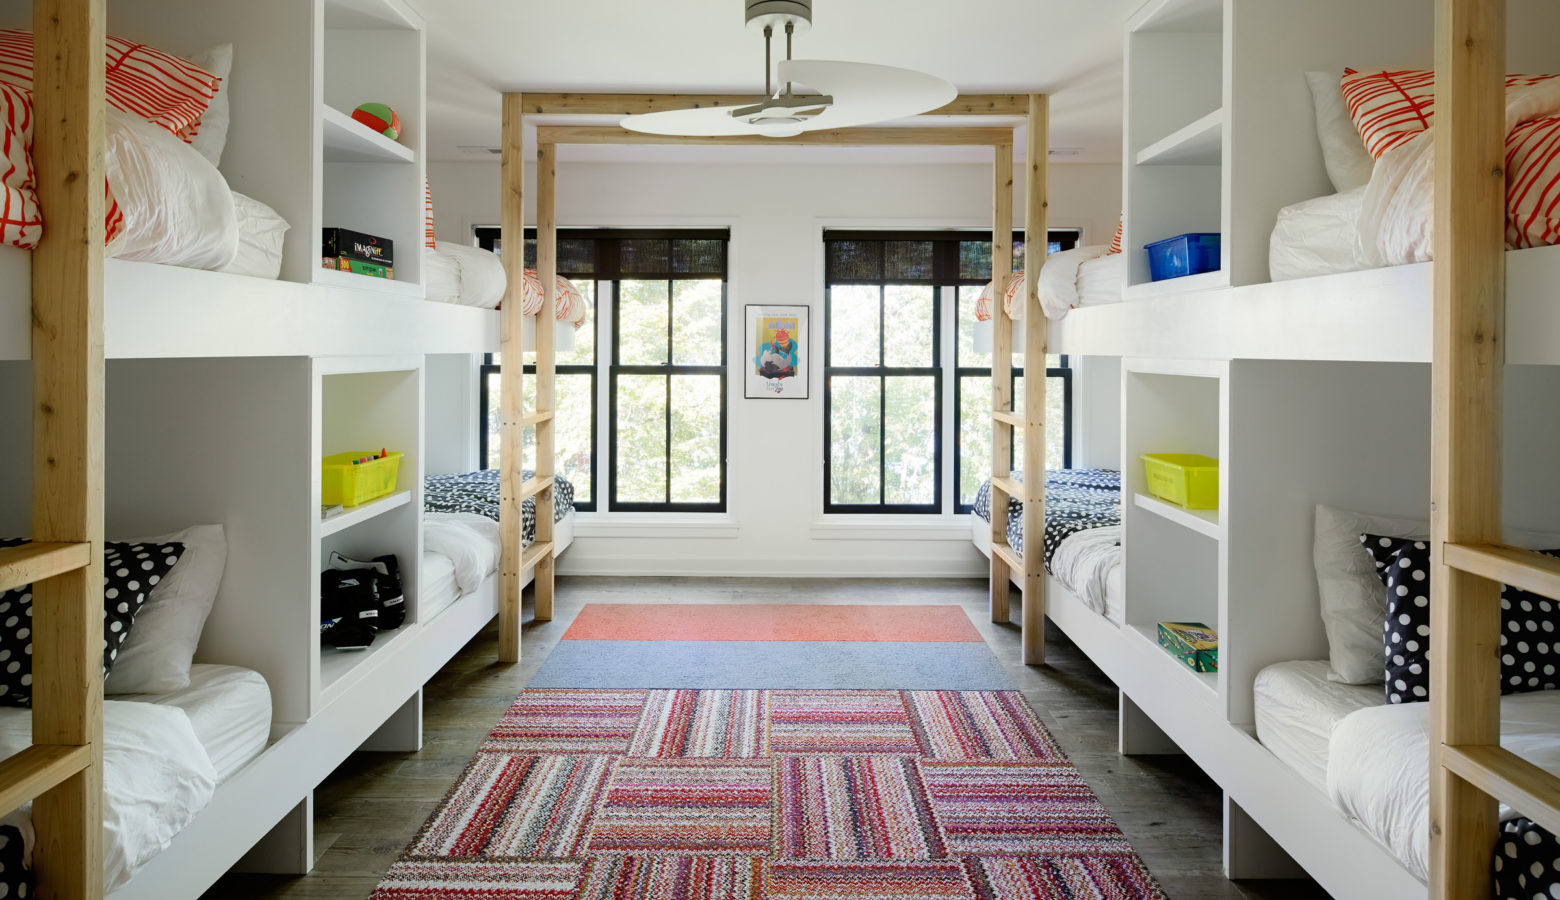 Bedroom Design for Kids: Bunk Rooms that Make Sleepovers a Dream